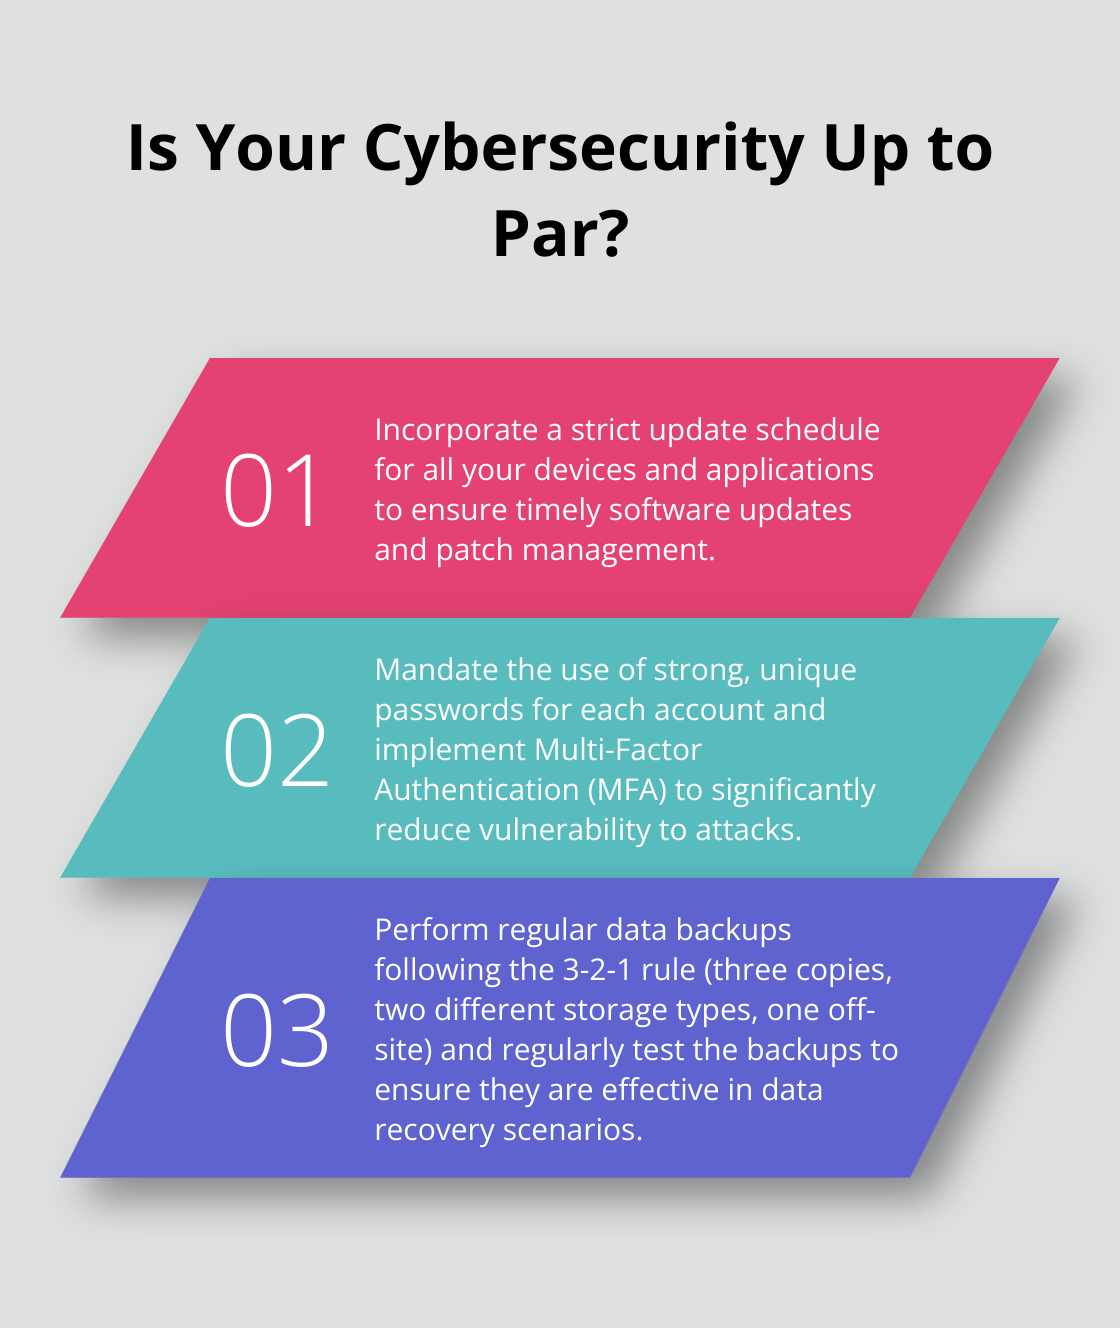 Fact - Is Your Cybersecurity Up to Par?